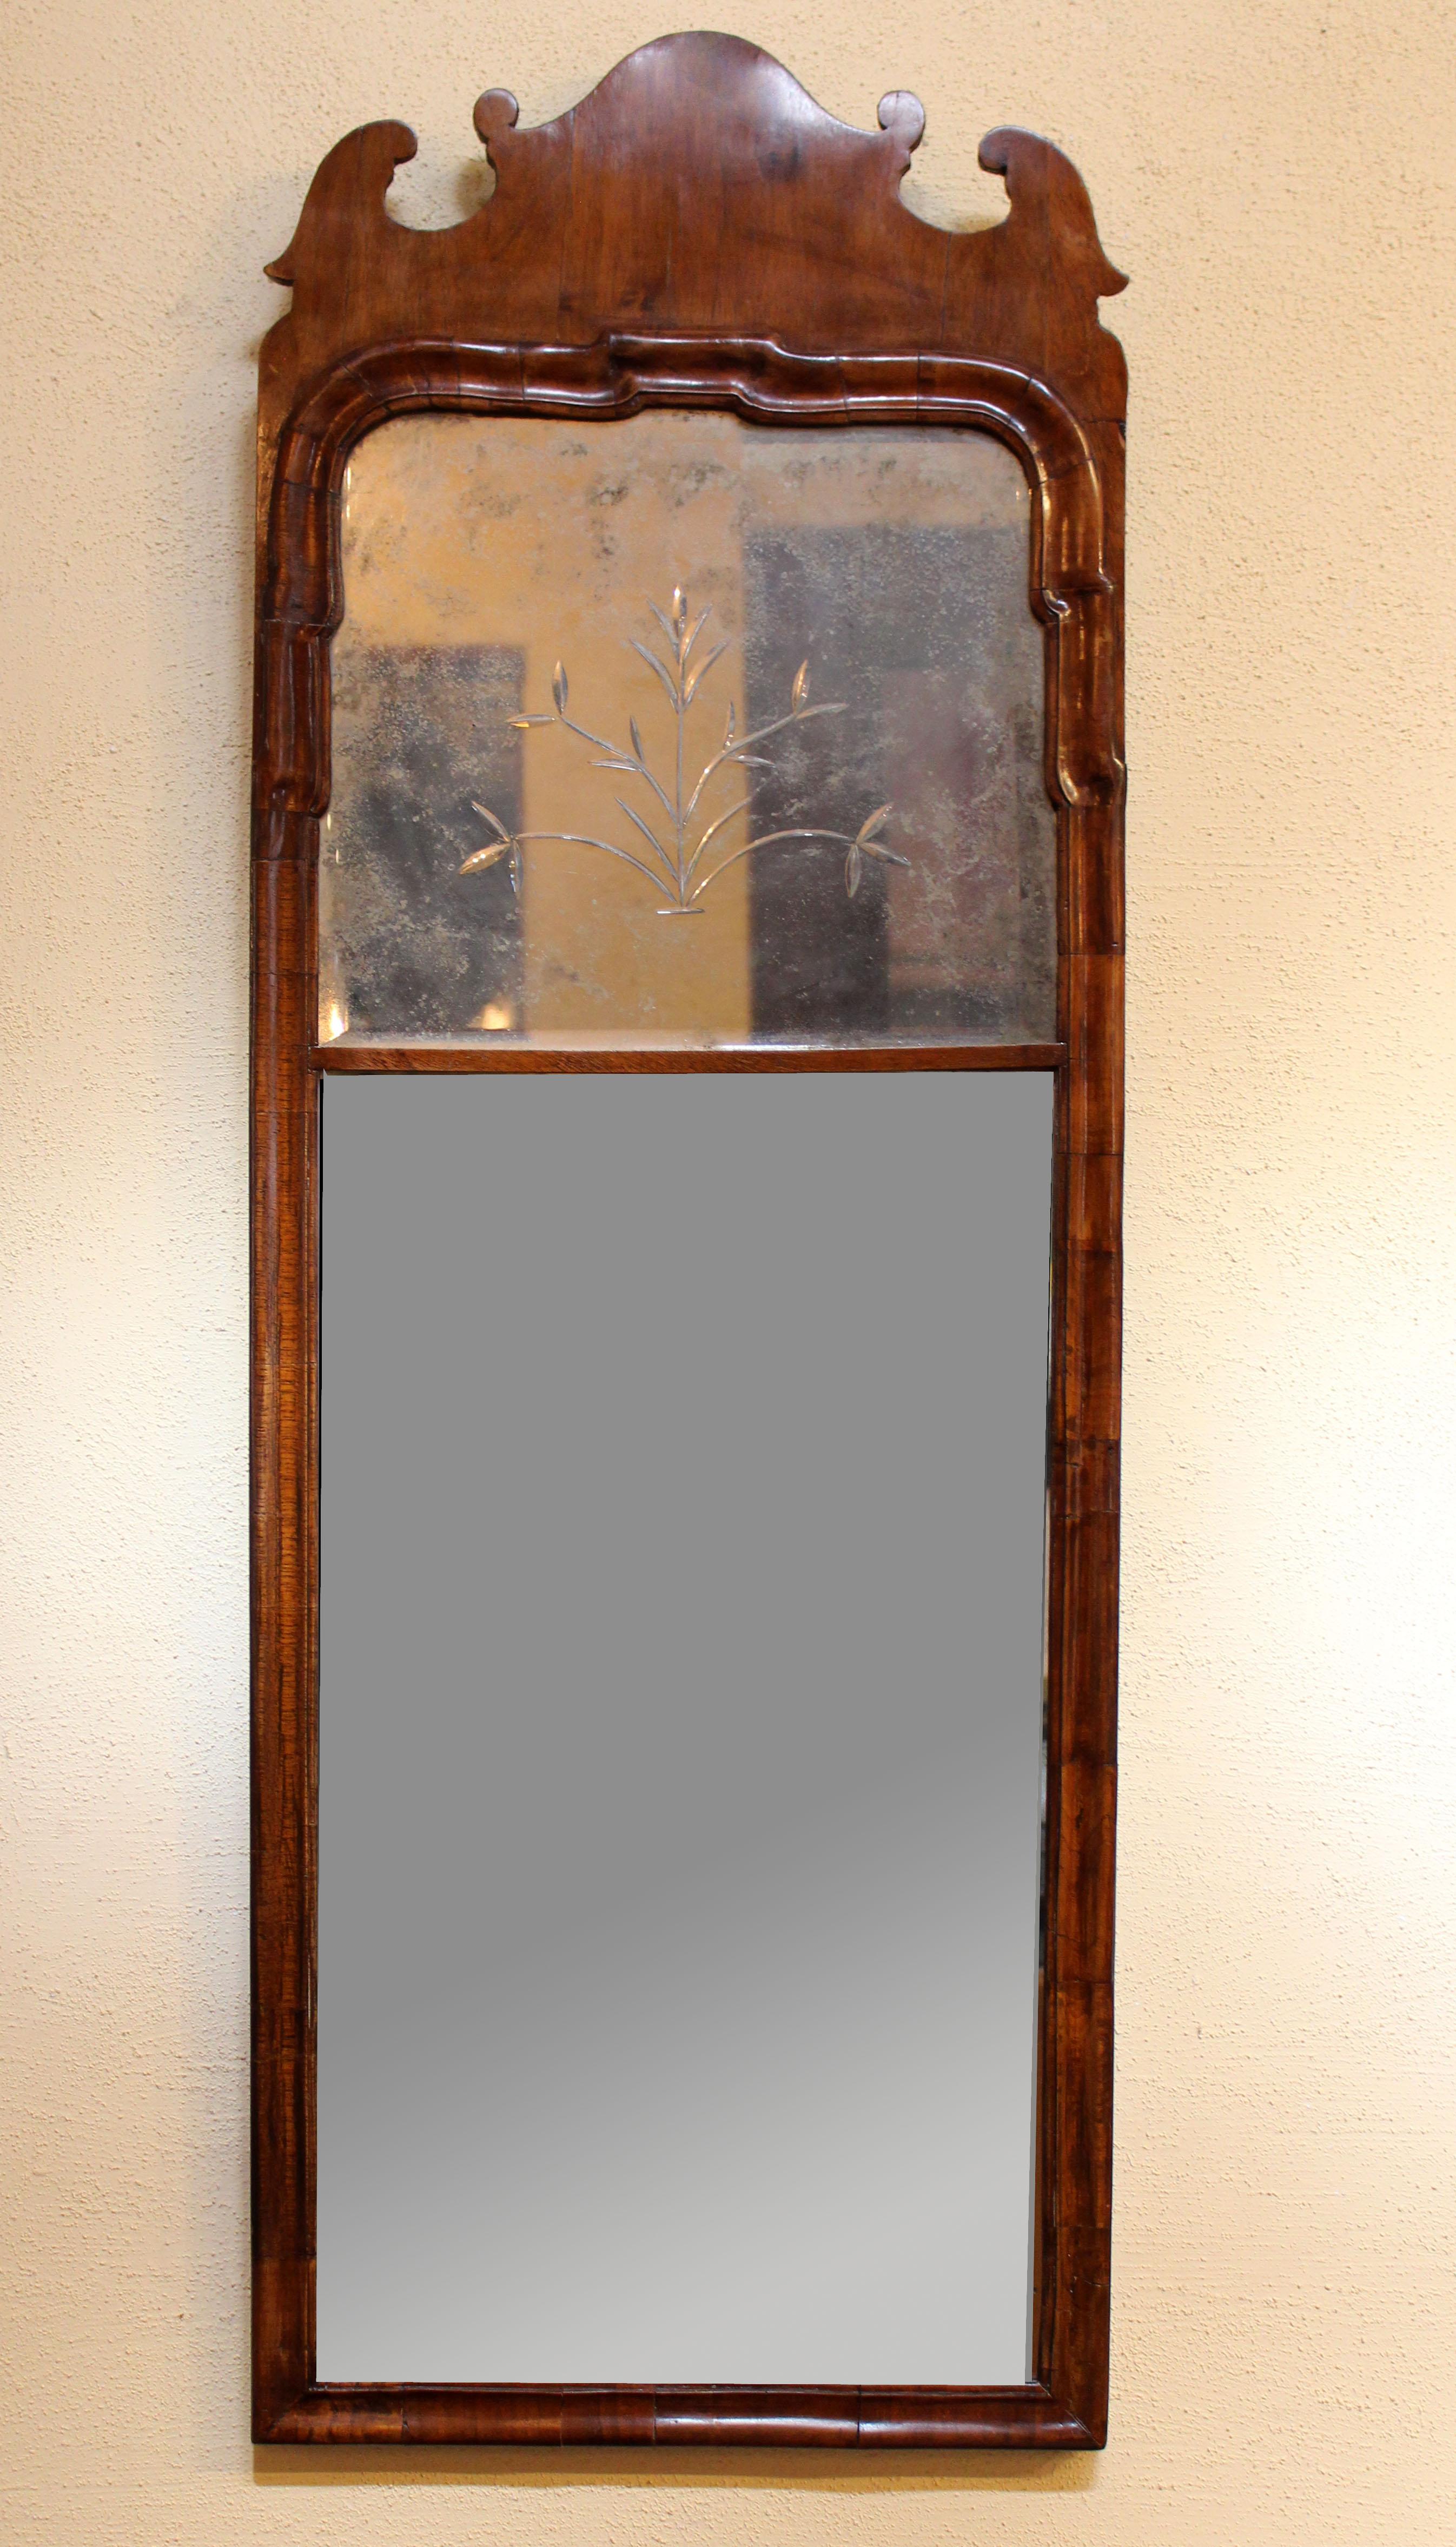 Walnut early George II mirror with original engraved tablet panel and original lower plate, c.1735. Moldings of multiple pieces, as expected for period construction. Pine secondary wood. Provenance: Caroline Faison antiques c.1980. Measures: 45